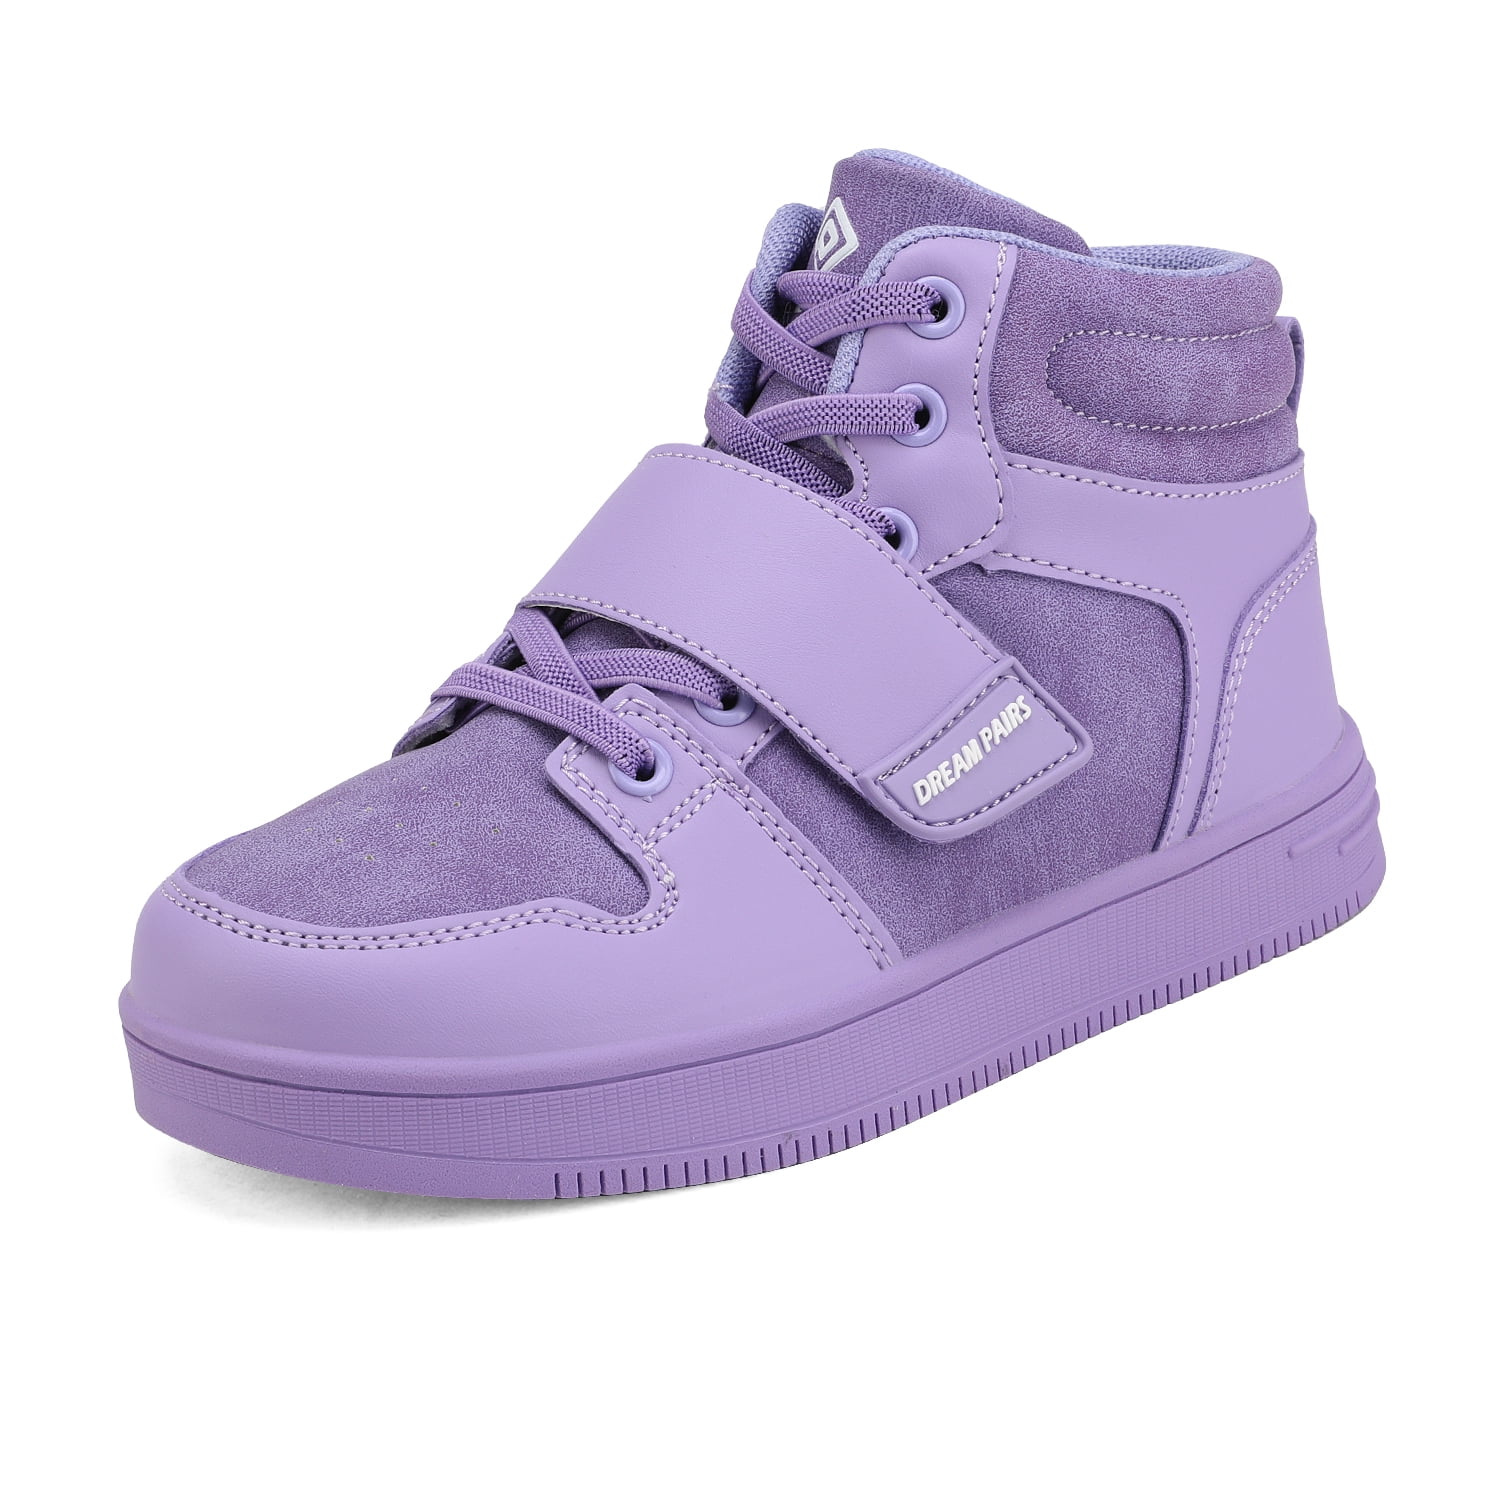 Boys Girls Kids High Top Fashion Sneaker Athletic Shoes Basketball Shoes 